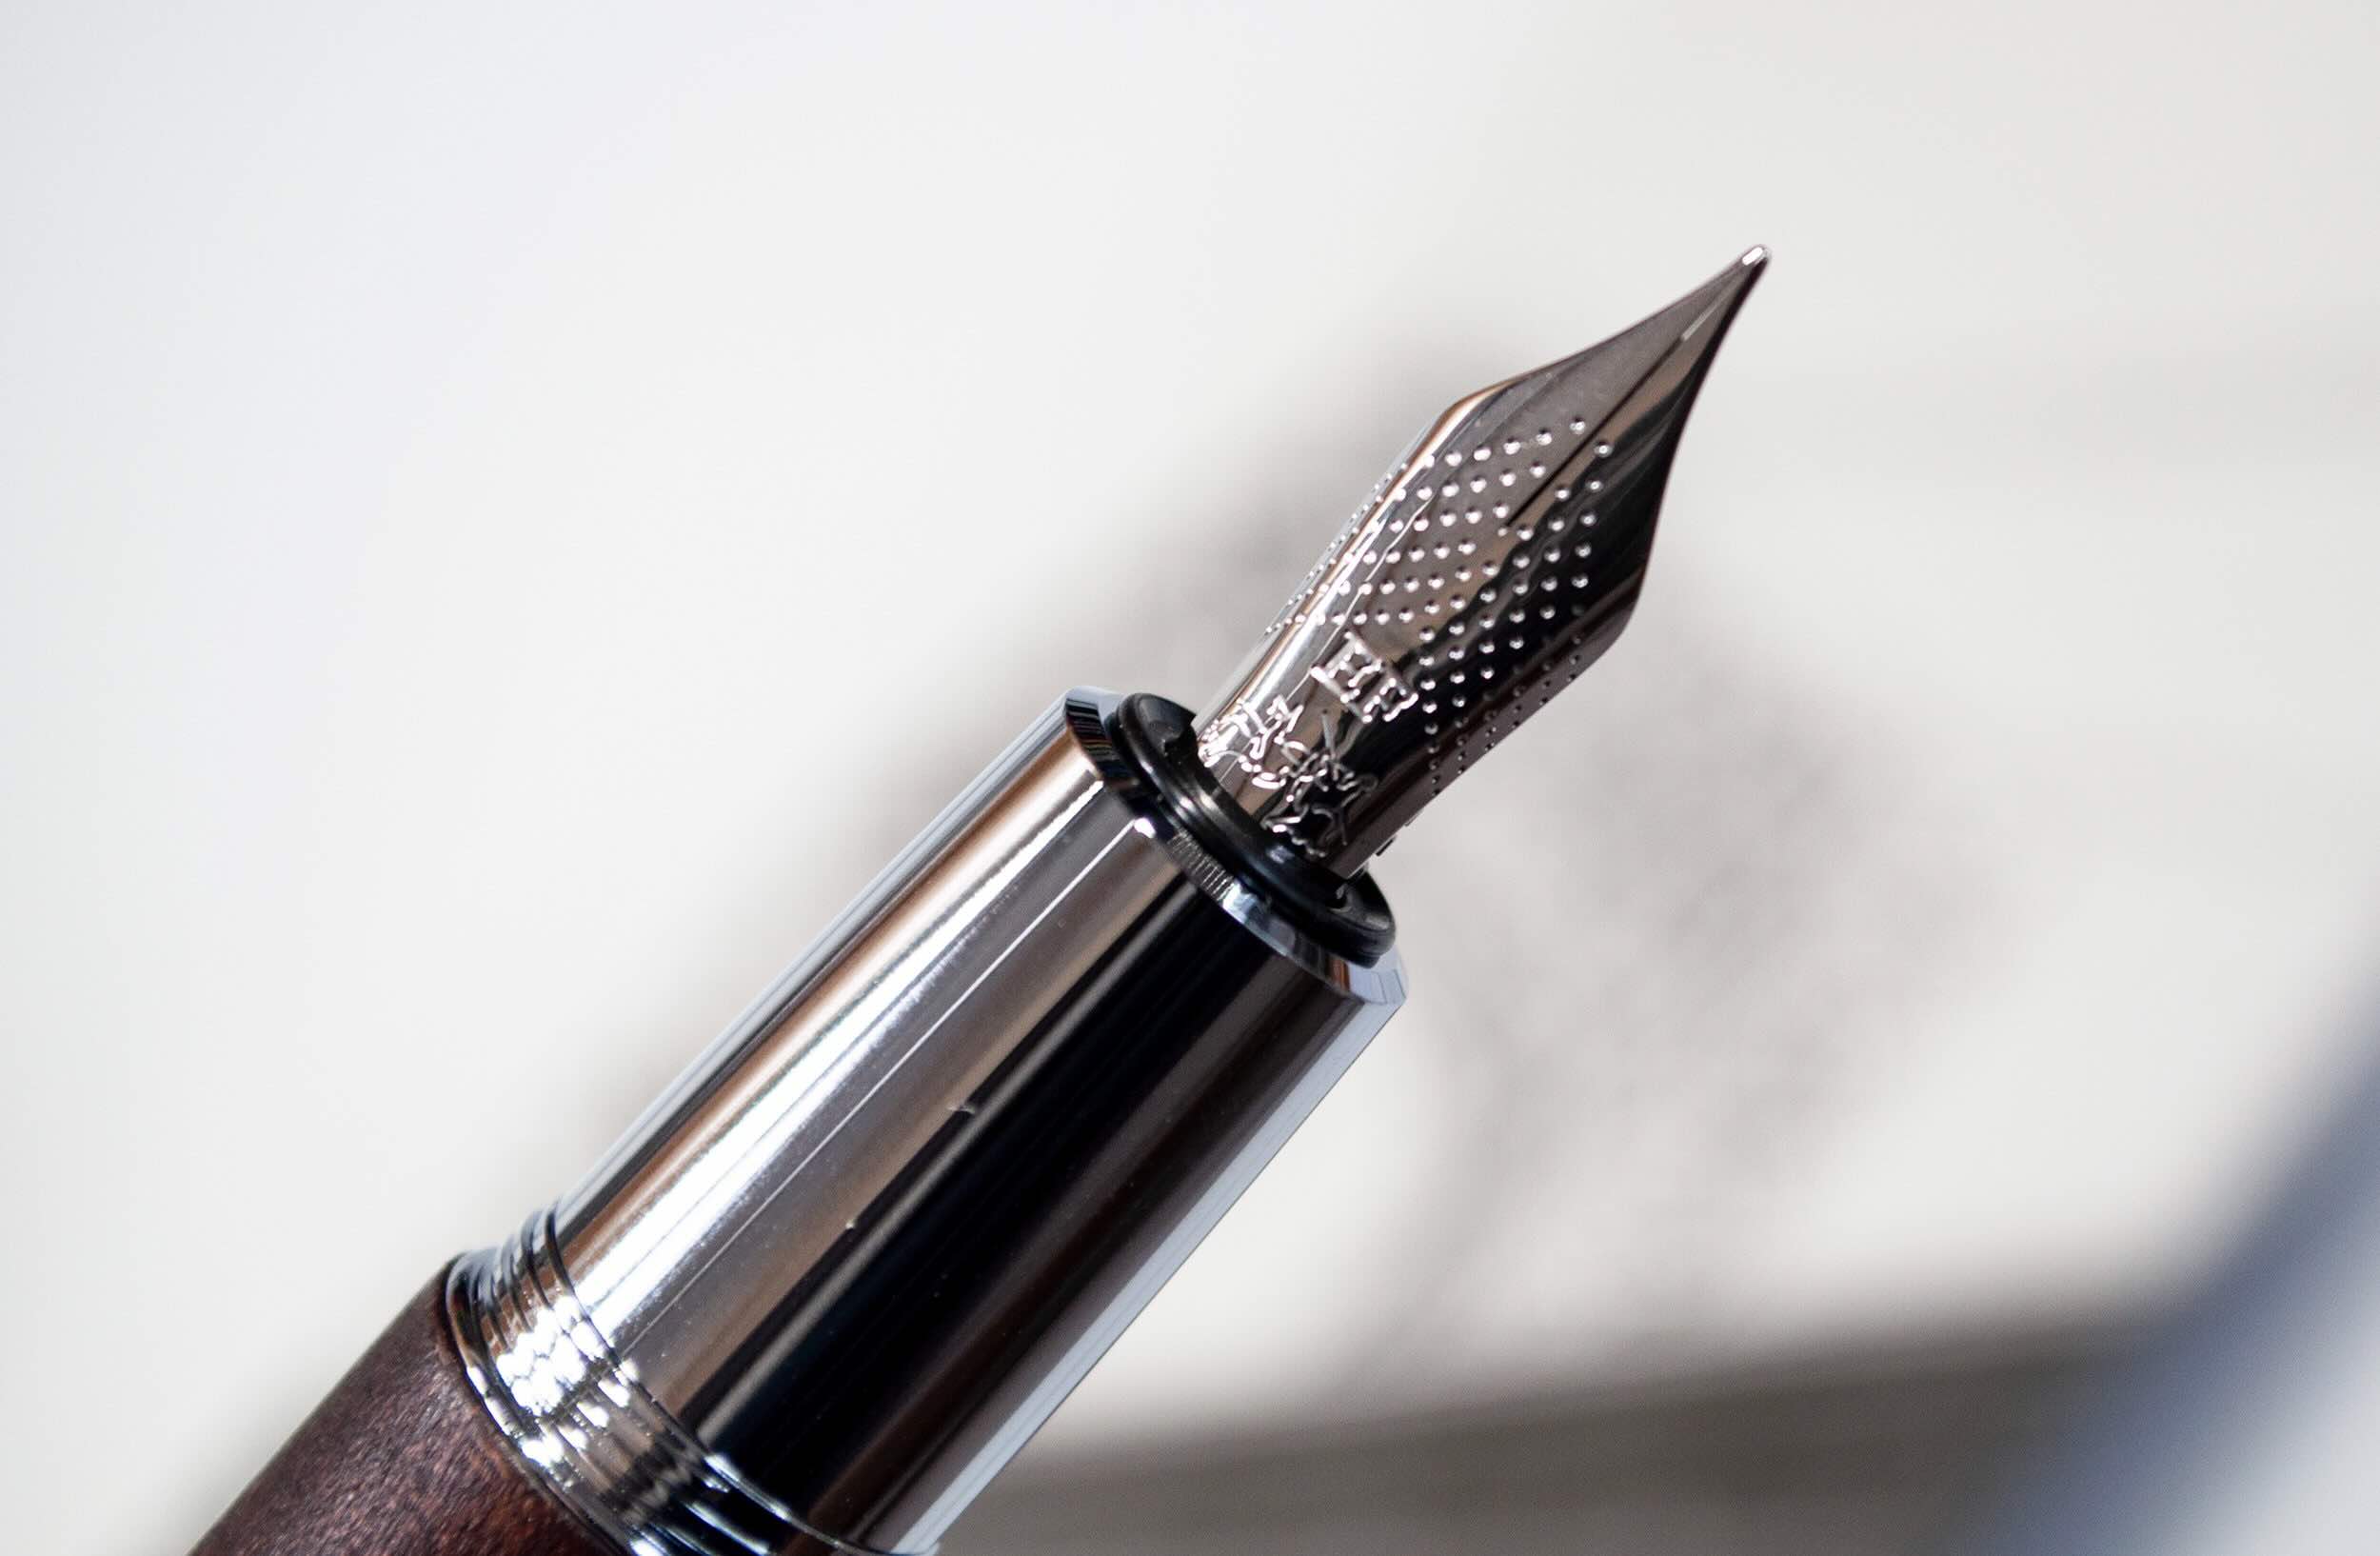 Fountain Pen Review: A Stylish Writing Instrument for Every Occasion